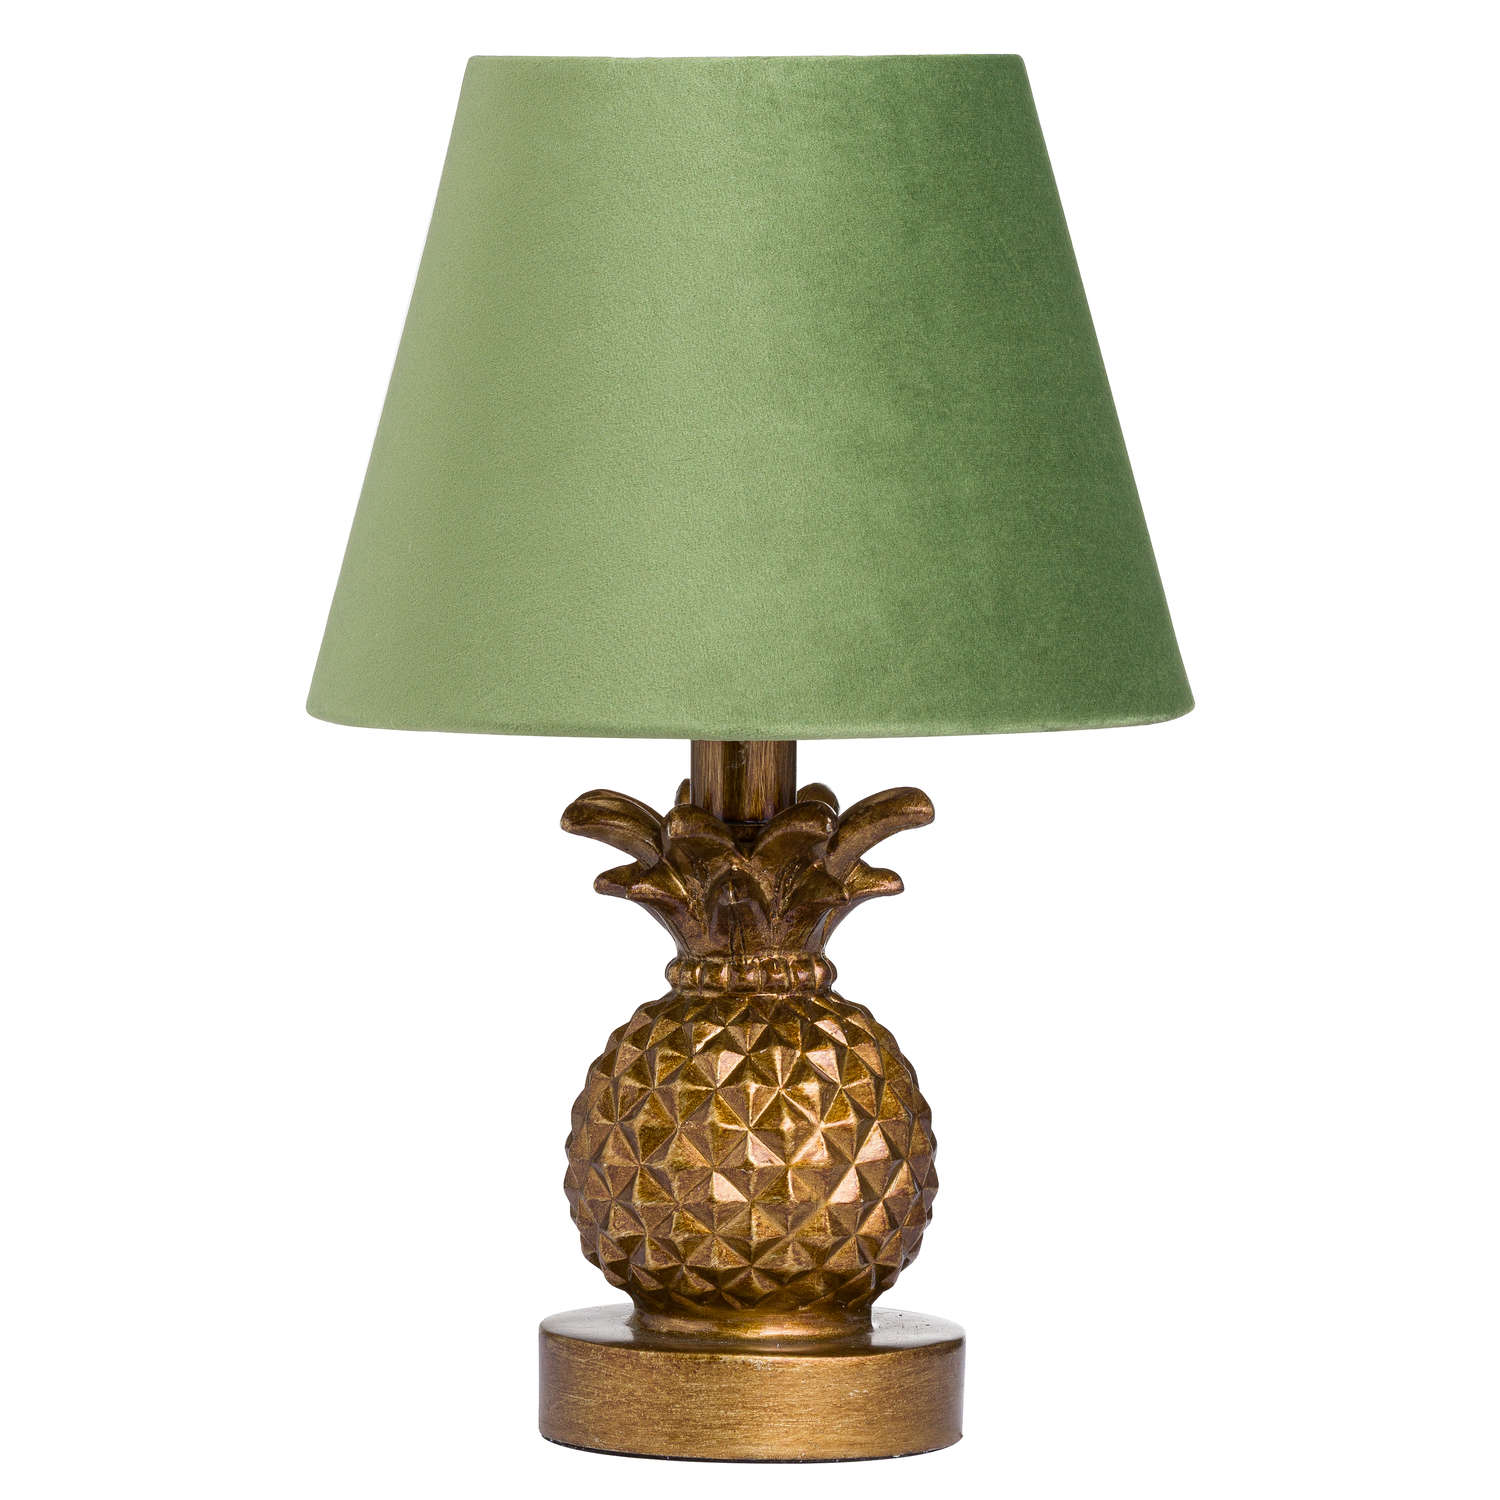 Antique Gold Pineapple Lamp With Artichoke Green VelvetShade - Image 1